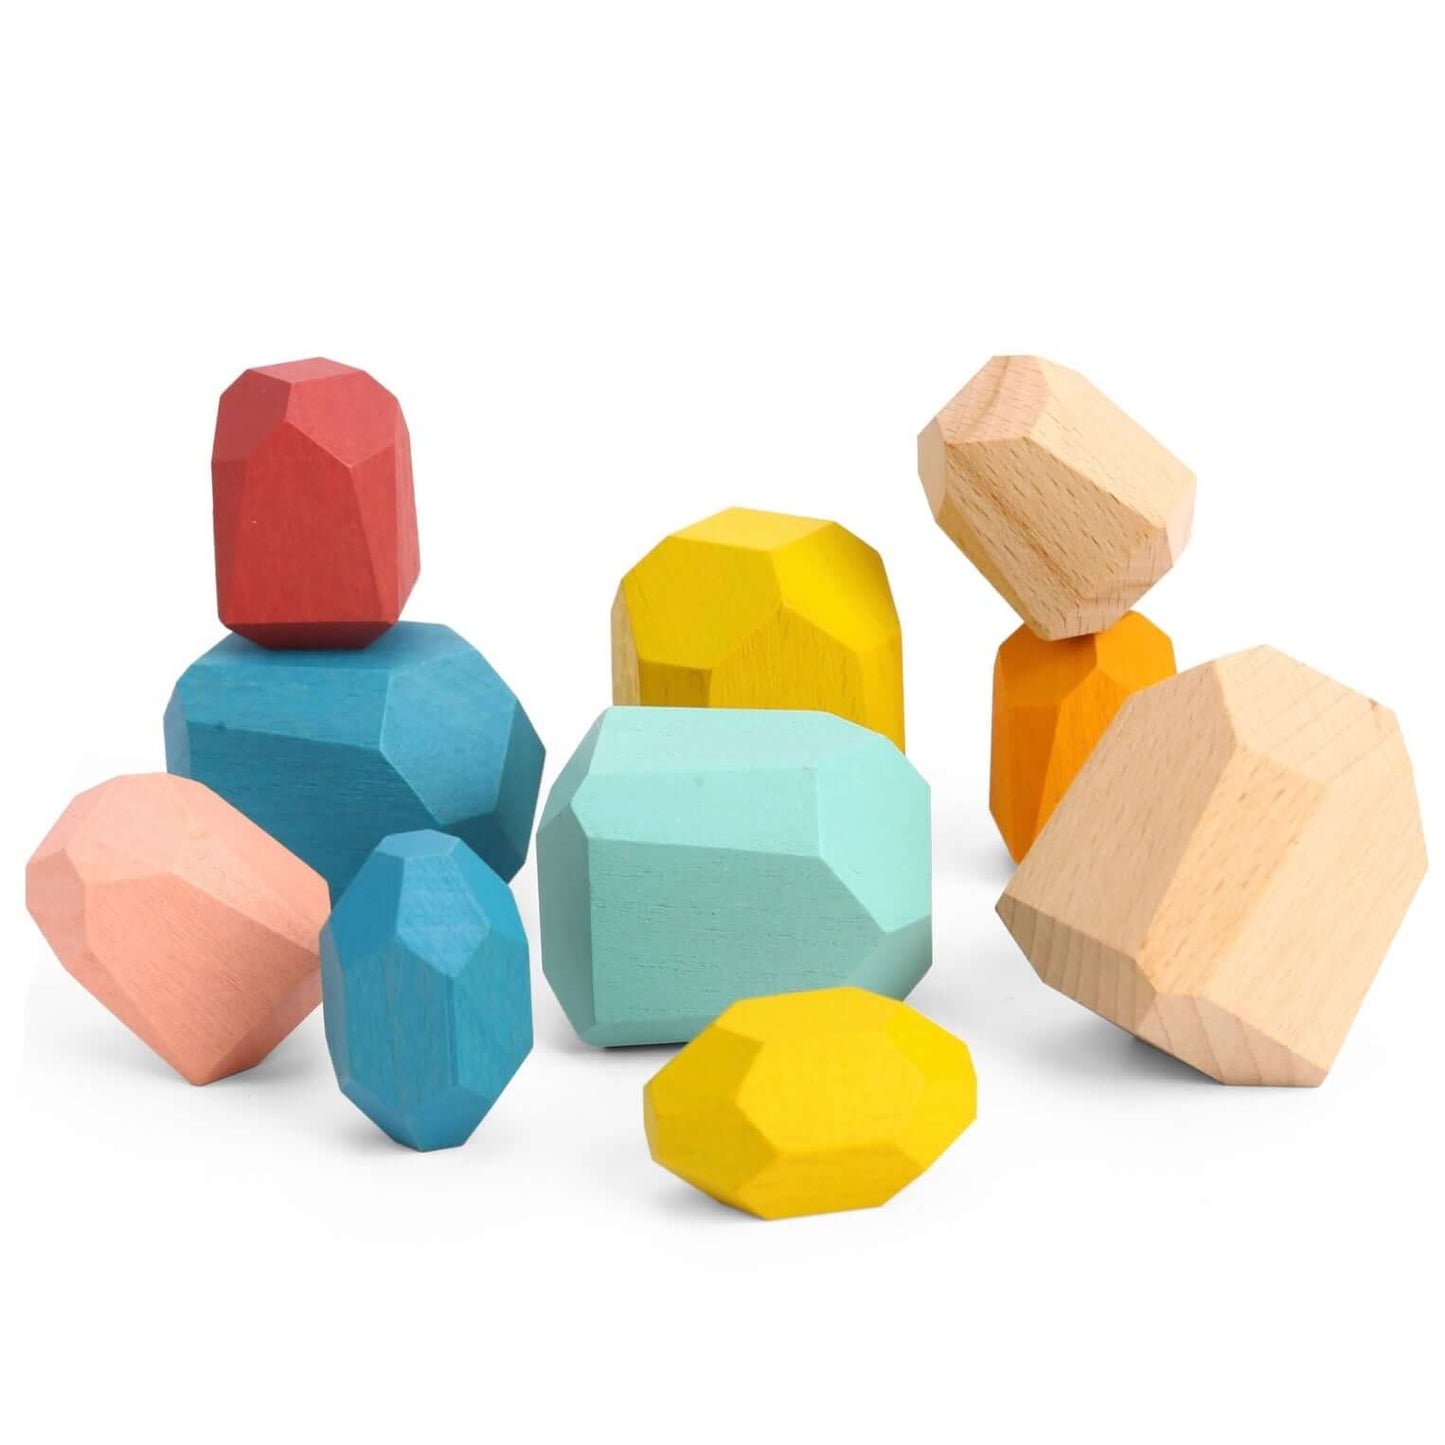 Tooky Toy Wooden Stacking Stones